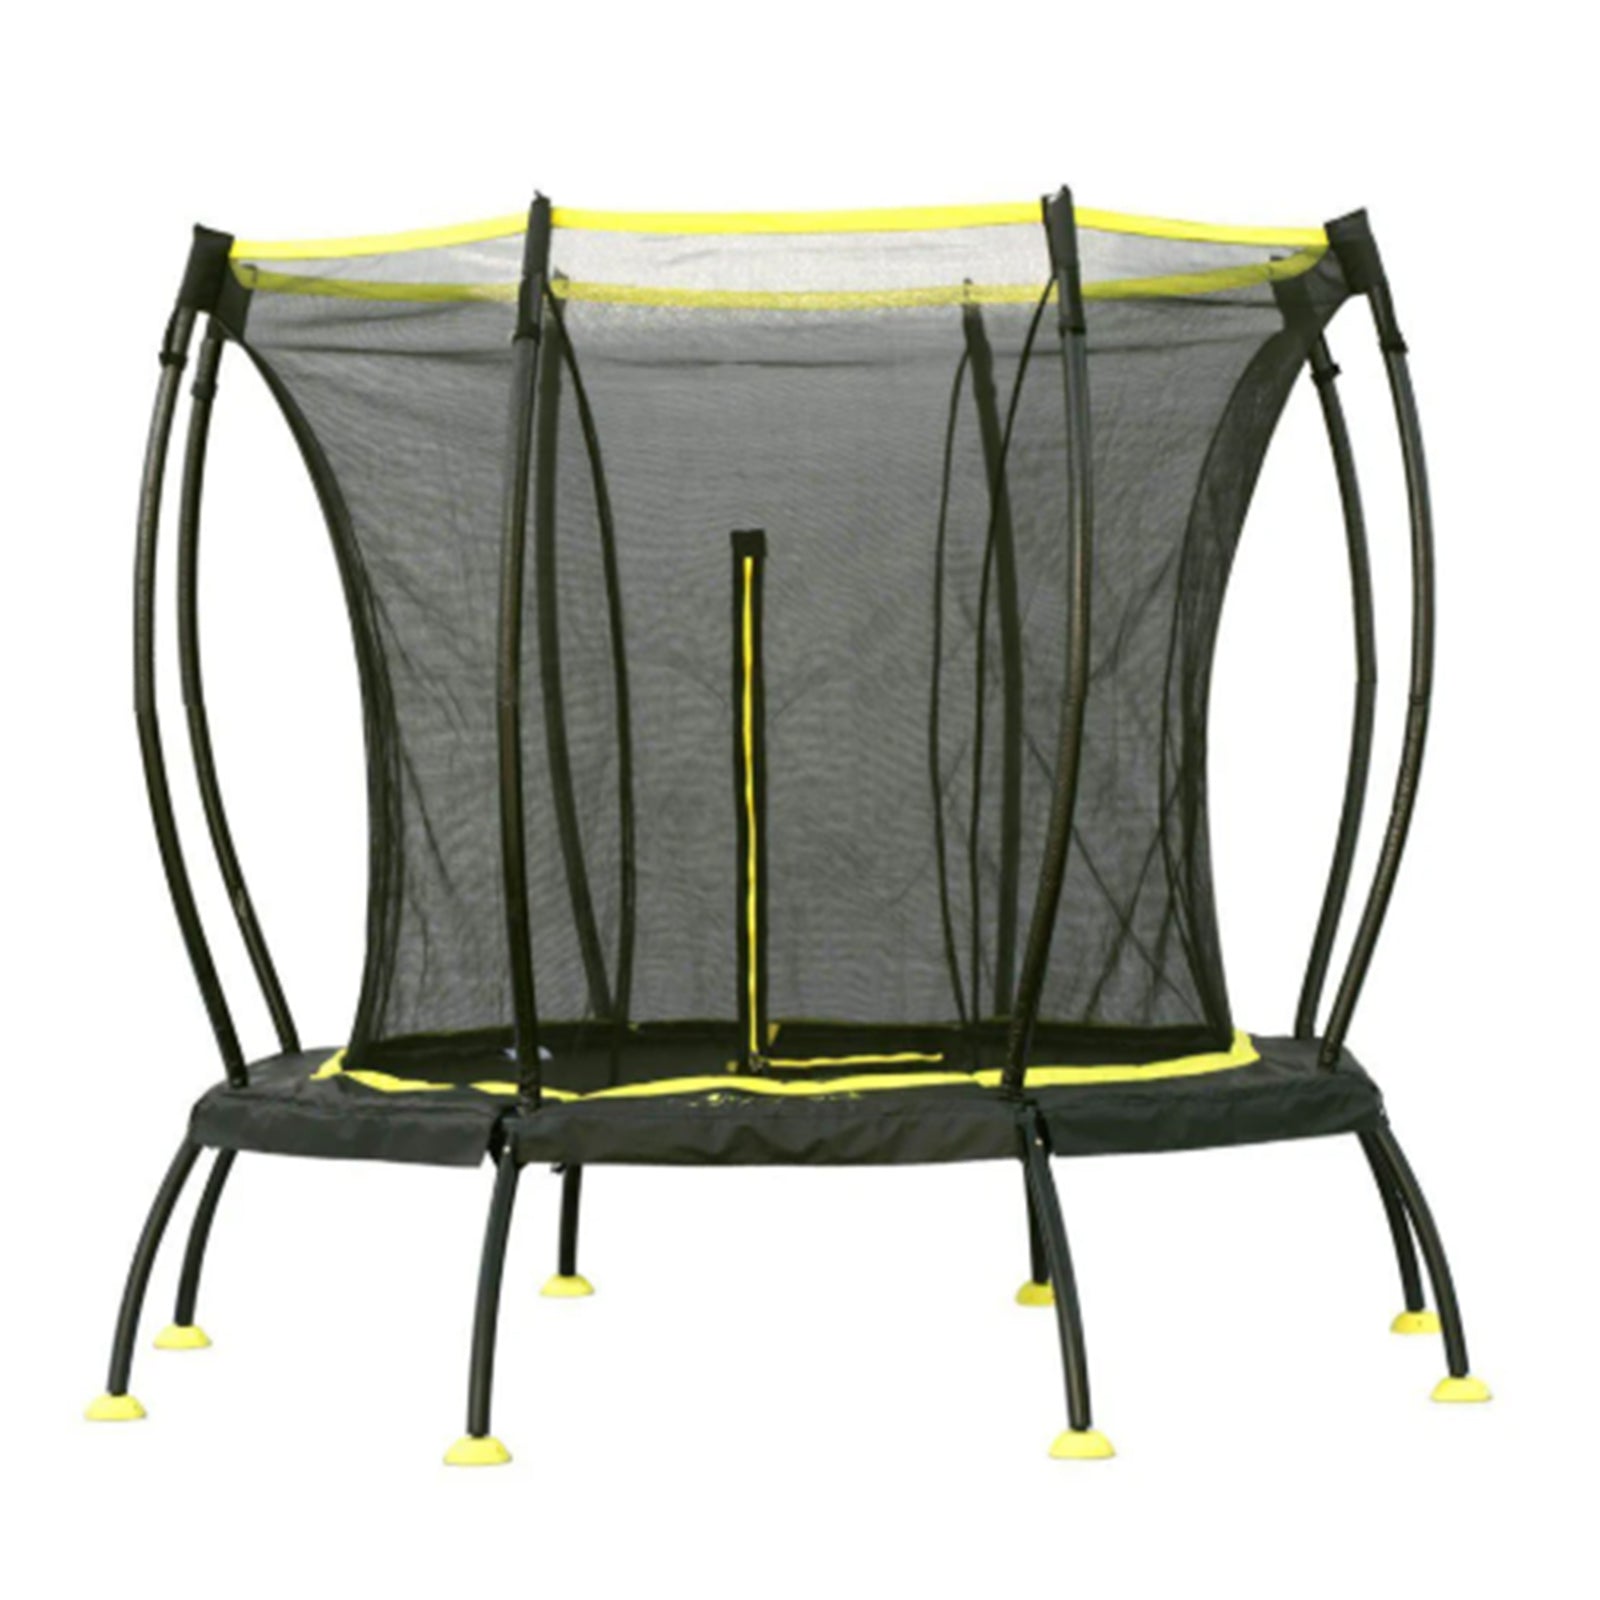 Net for 8 foot Atmos Trampoline - Yellow (Part C).